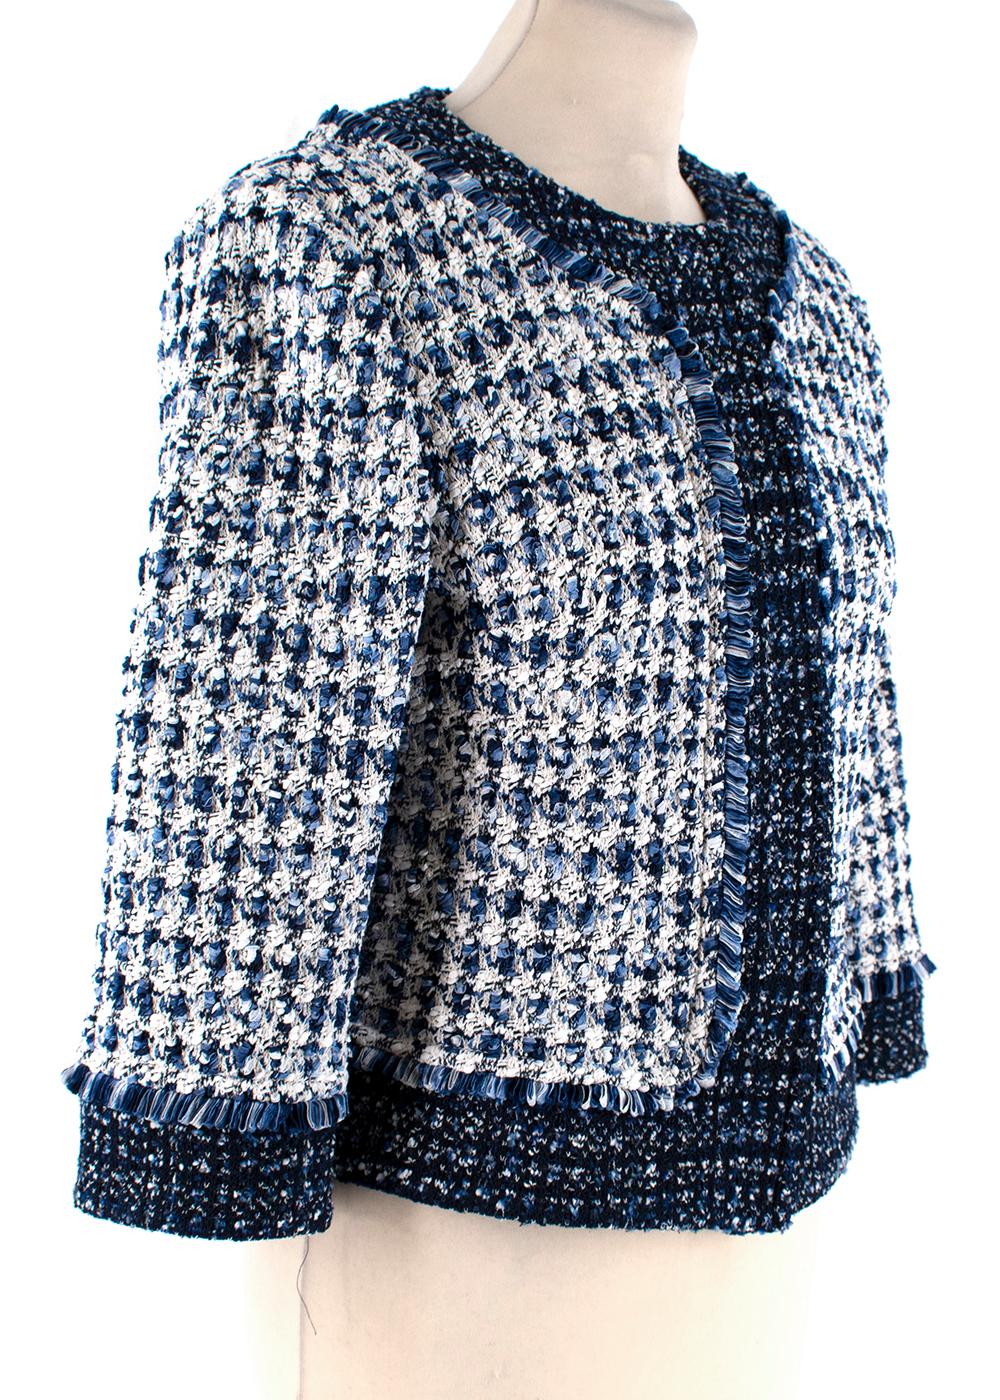 Midnight Blue White Check Tweed Fringe Trim

Done in lovely tweed check knit and trimmed in midnight textured tweed and ribbon fringe, this jacket features round neck, hidden snap closure, 3/4 sleeves, princess seams, and shoulder pads.  

Made in